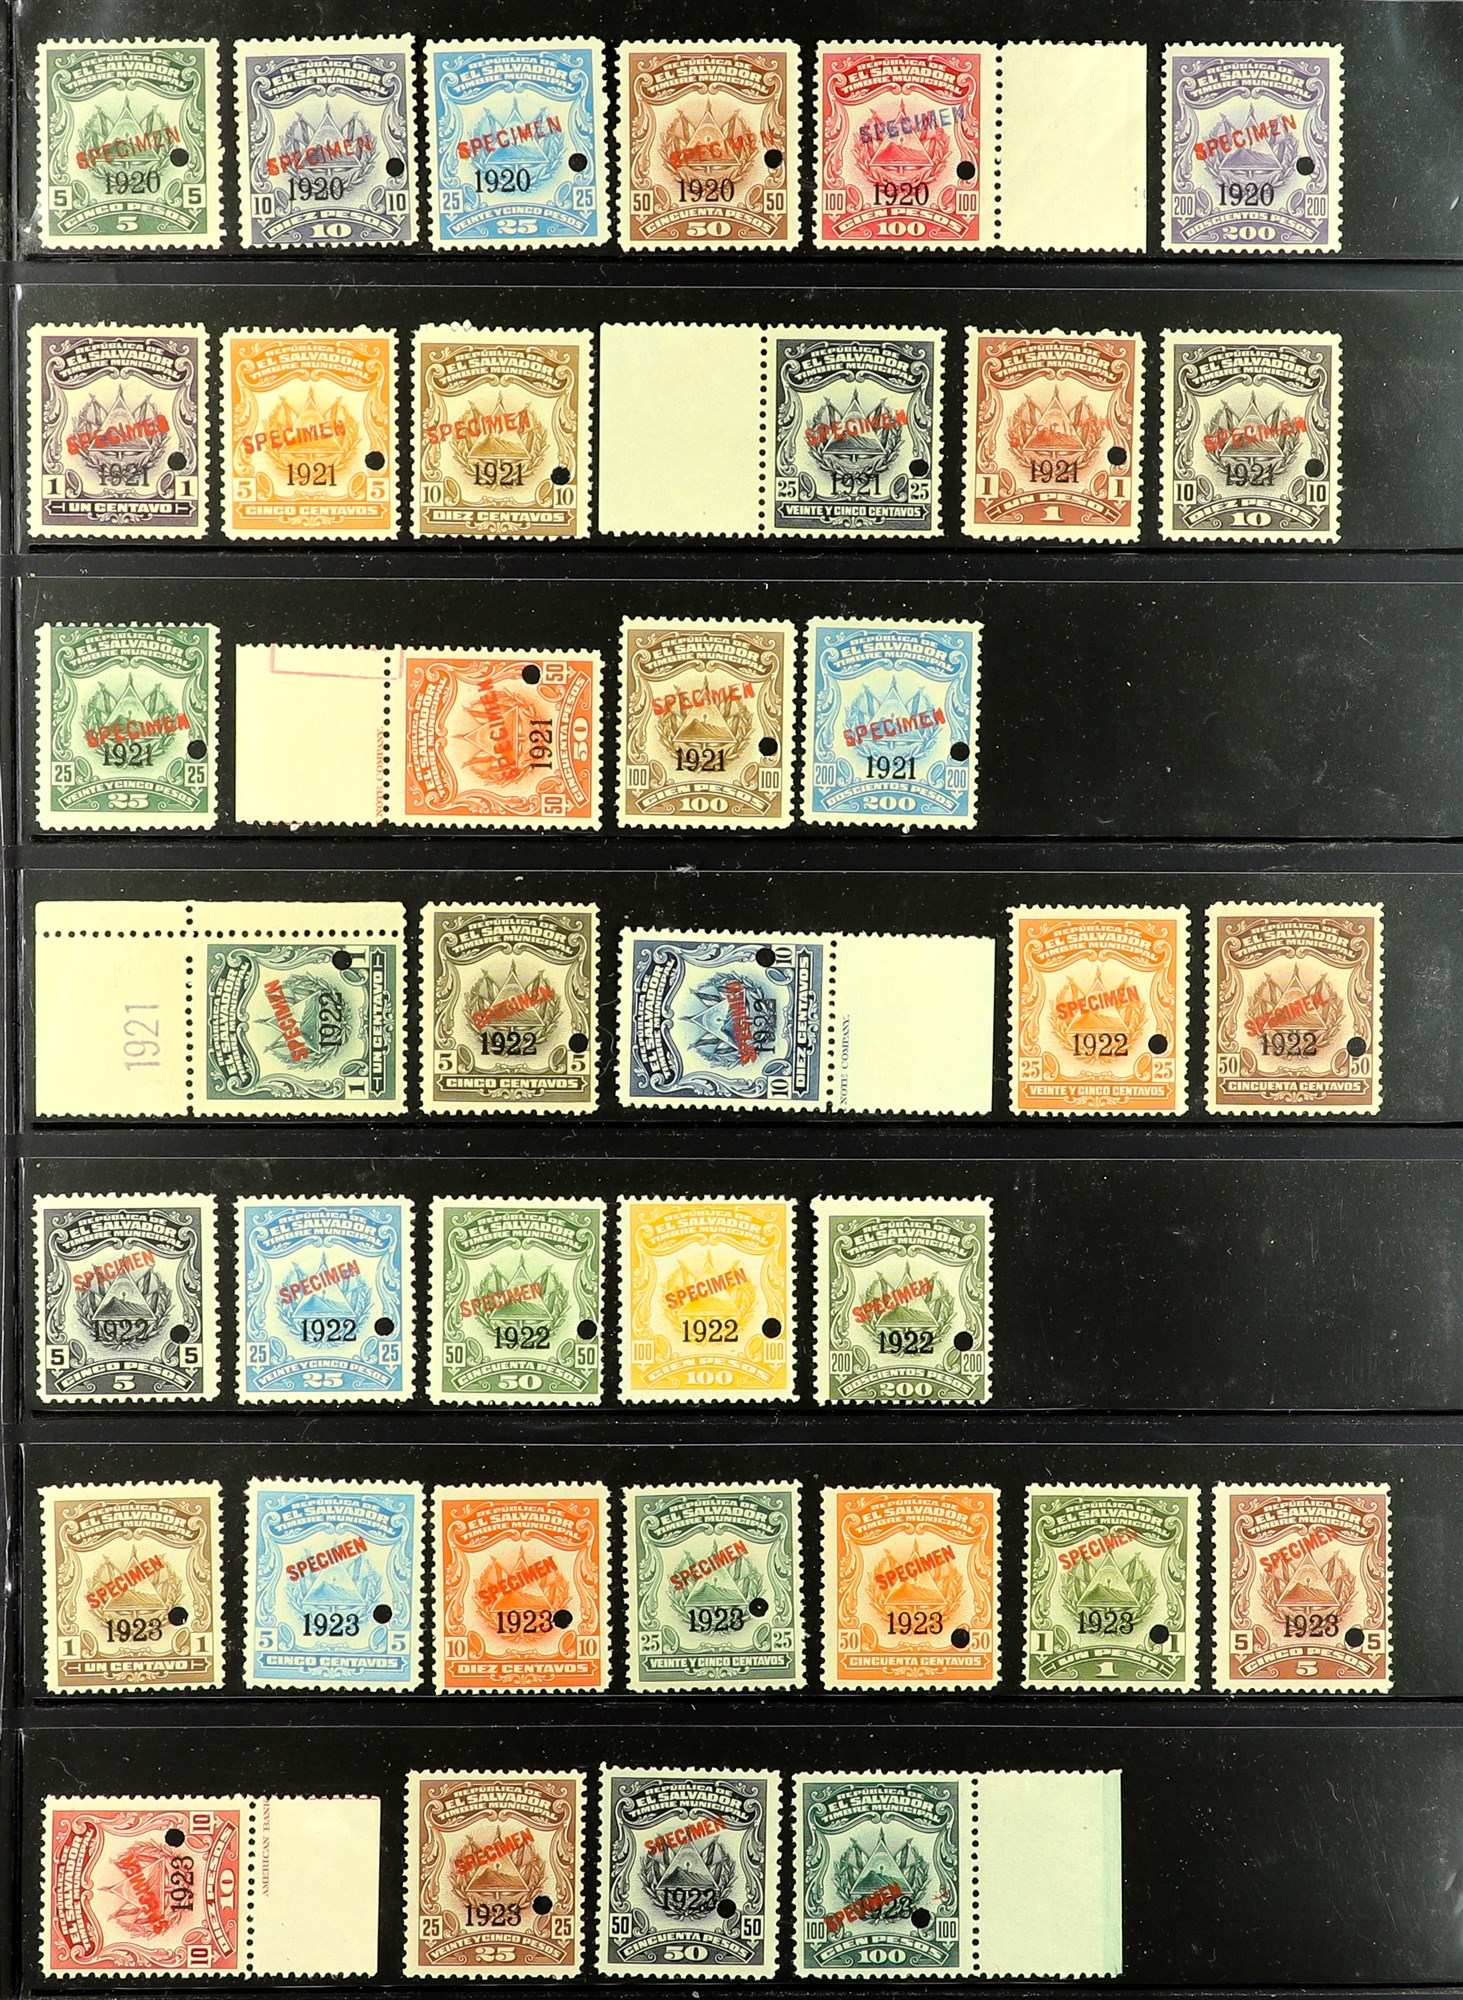 EL SALVADOR 1918 - 1933 'TIMBRE MUNICIPAL' REVENUE STAMPS collection of 180+ never hinged mint - Image 2 of 5